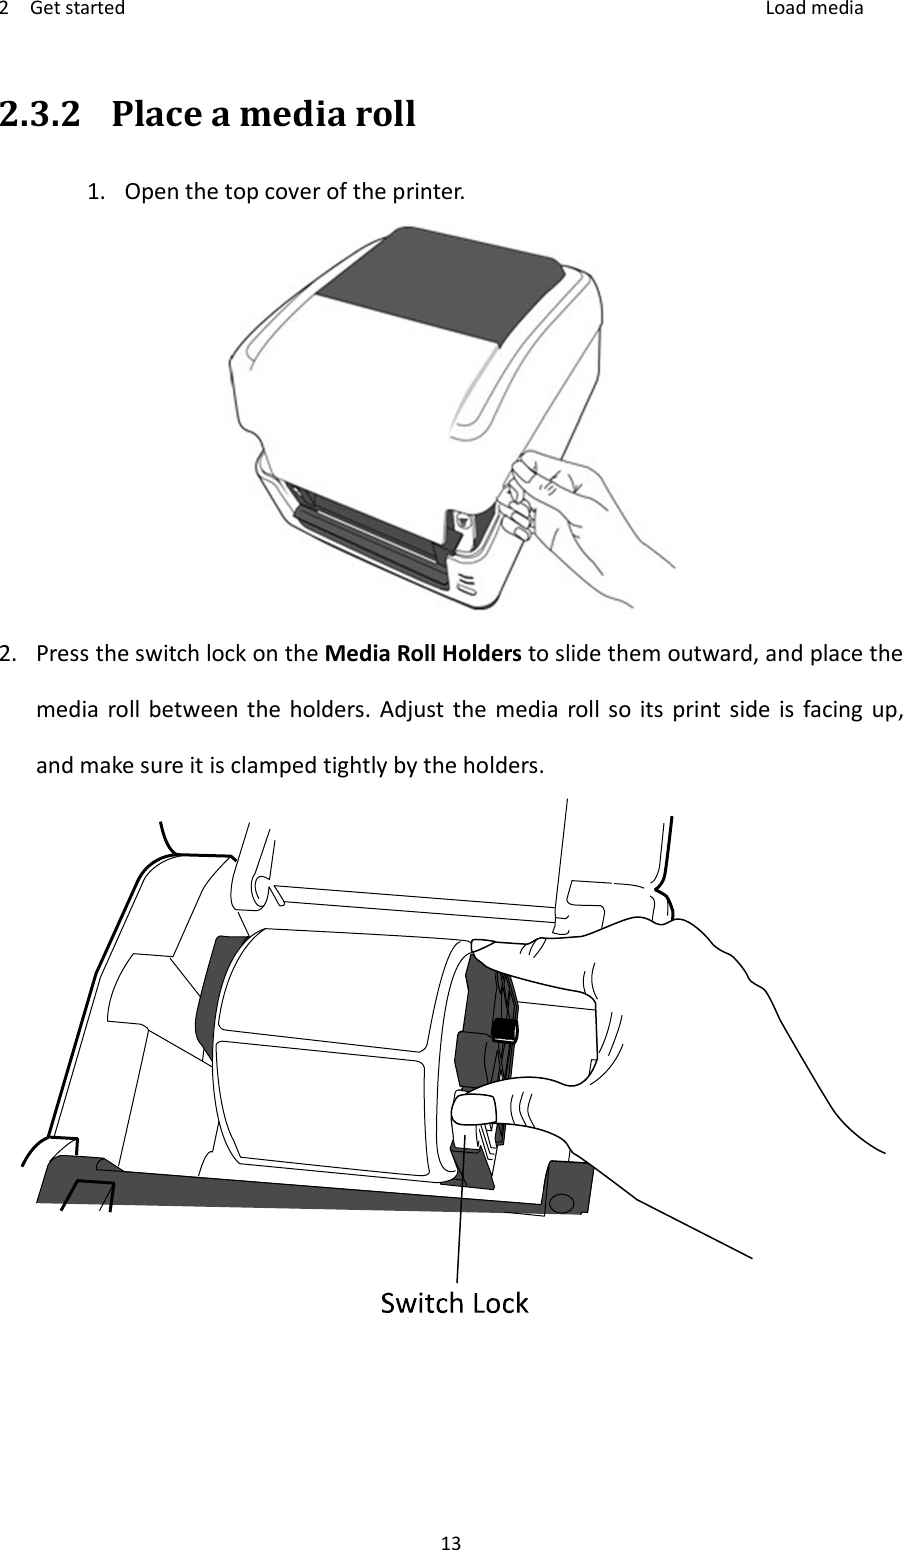 2    Get started    Load media 13 2.3.2 Place a media roll   1. Open the top cover of the printer.  2. Press the switch lock on the Media Roll Holders to slide them outward, and place the media roll between  the  holders.  Adjust the  media  roll so  its  print  side  is  facing  up, and make sure it is clamped tightly by the holders.     